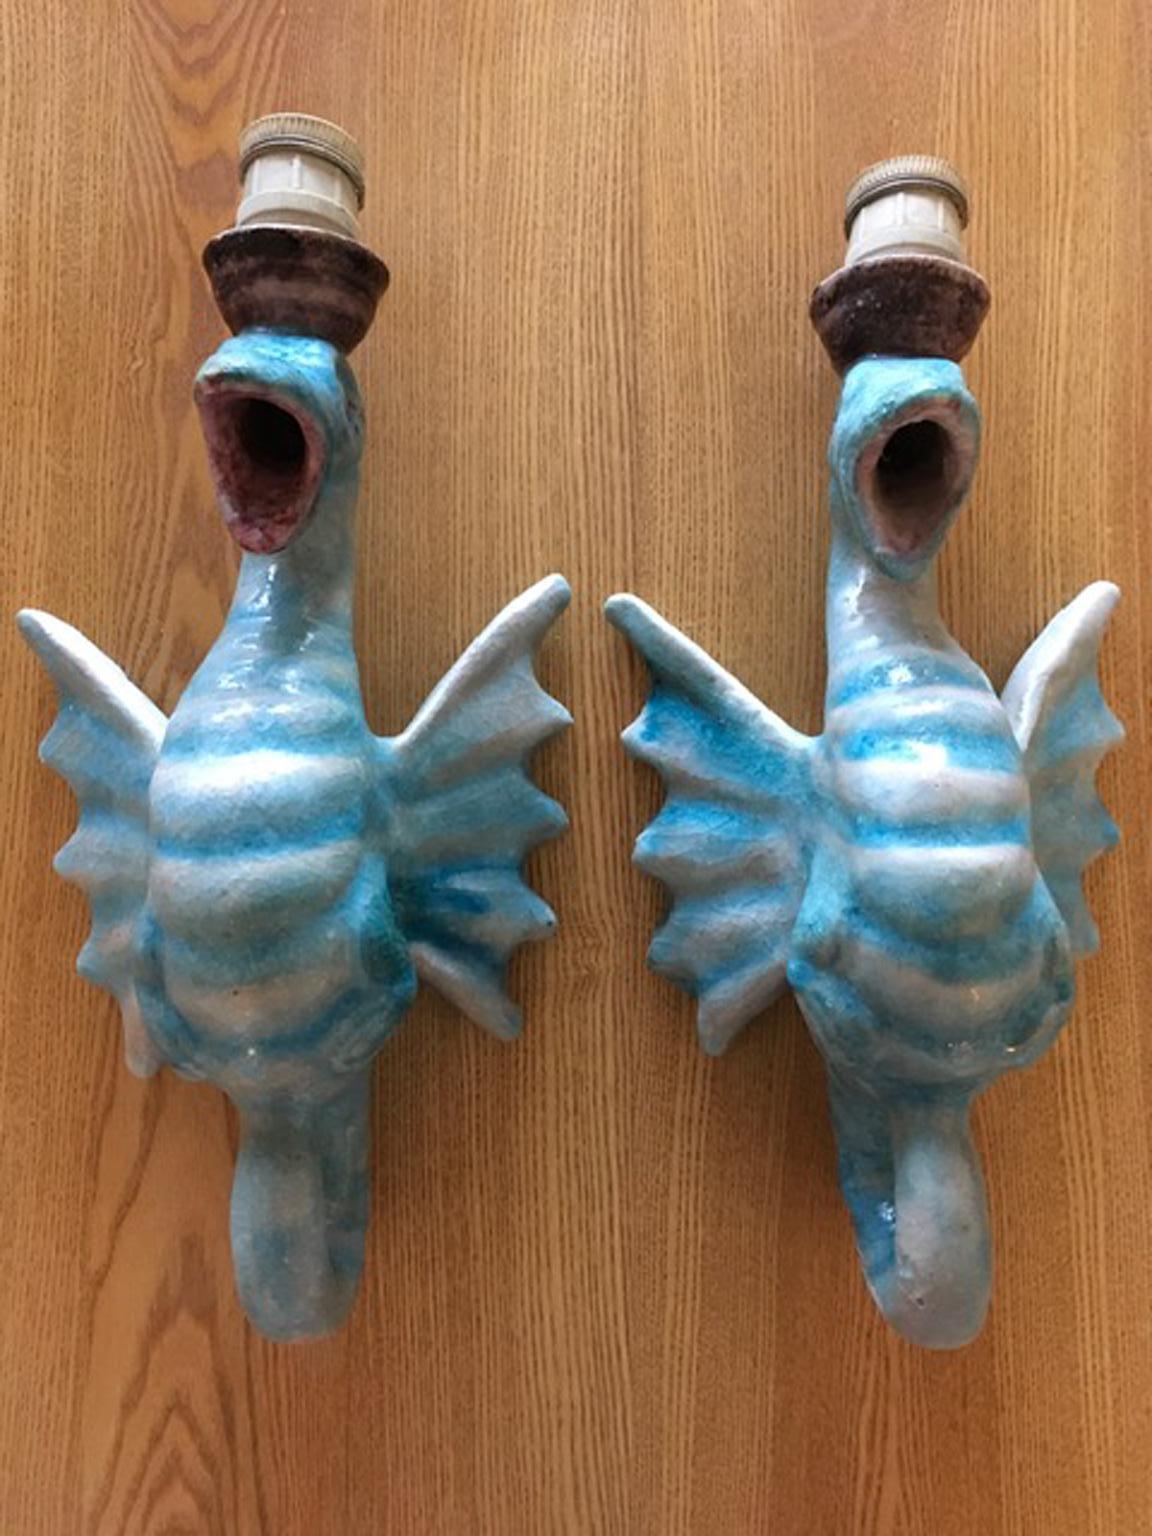 This pair of iconic Italian wall sconces in blue ceramic, are in very good conditions.
The back has some raw parts but they are not visible when wall mounted. The style is following Gabriella Crespi, an iconic Italian interior designer of